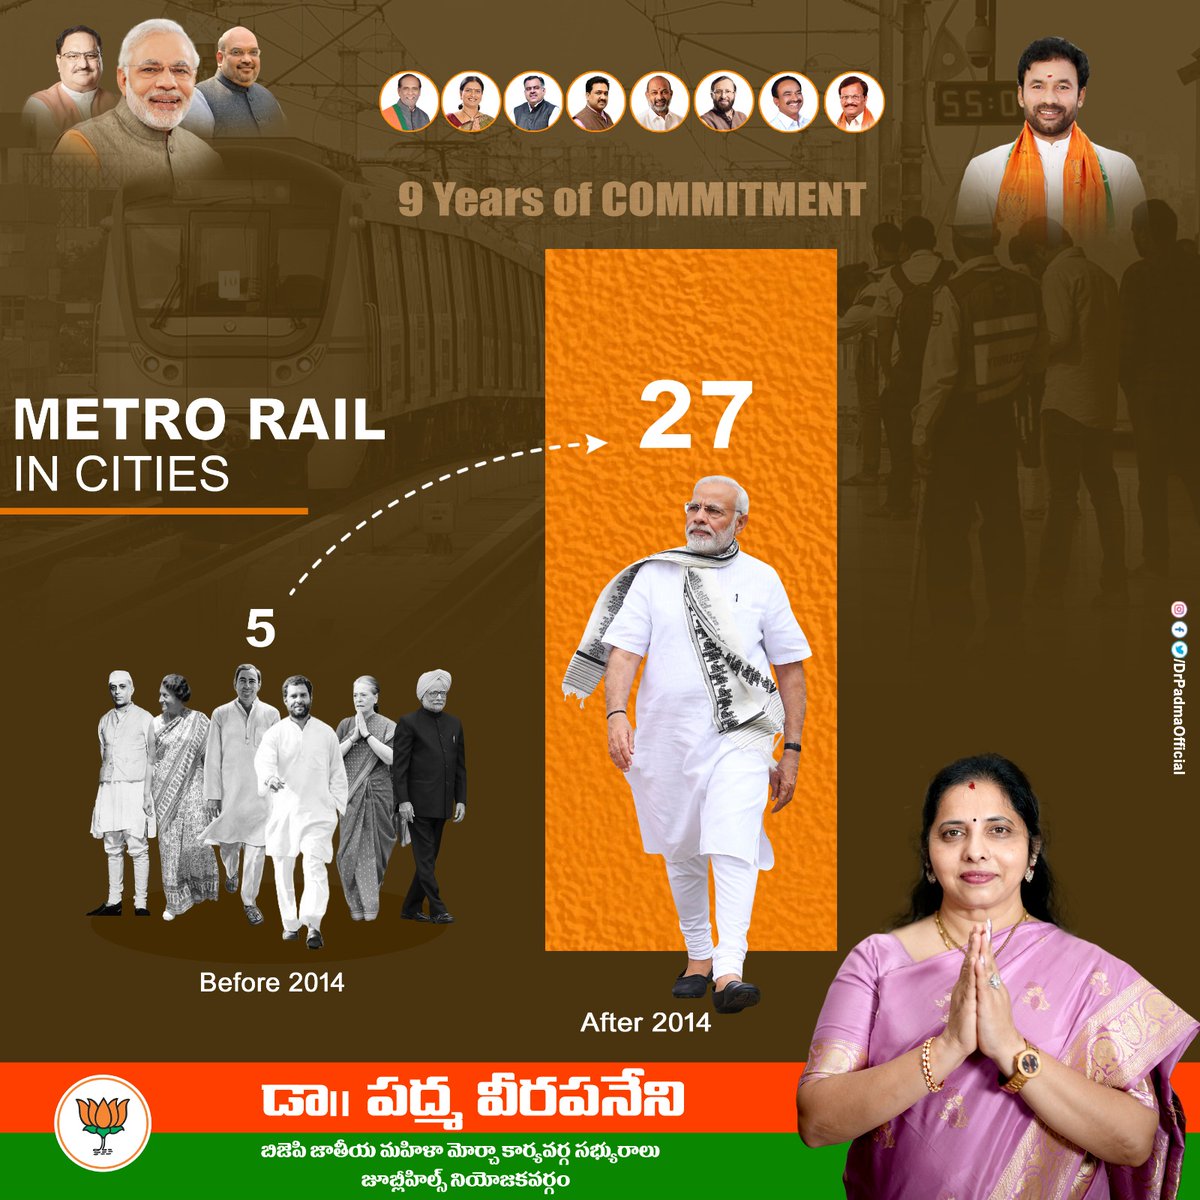 Convenient, Comfortable & Affordable Urban Commute in Indian Cities!
Metro network has exponentially expanded under @narendramodi ji govt.
Before 2014 - 5
After 2014 - 27
#NewIndia #MetroRail #MetroCities #NarendraModi #PMModi #Modi #AmitShah #9yearsofModiGovernment #9YearsOfSeva